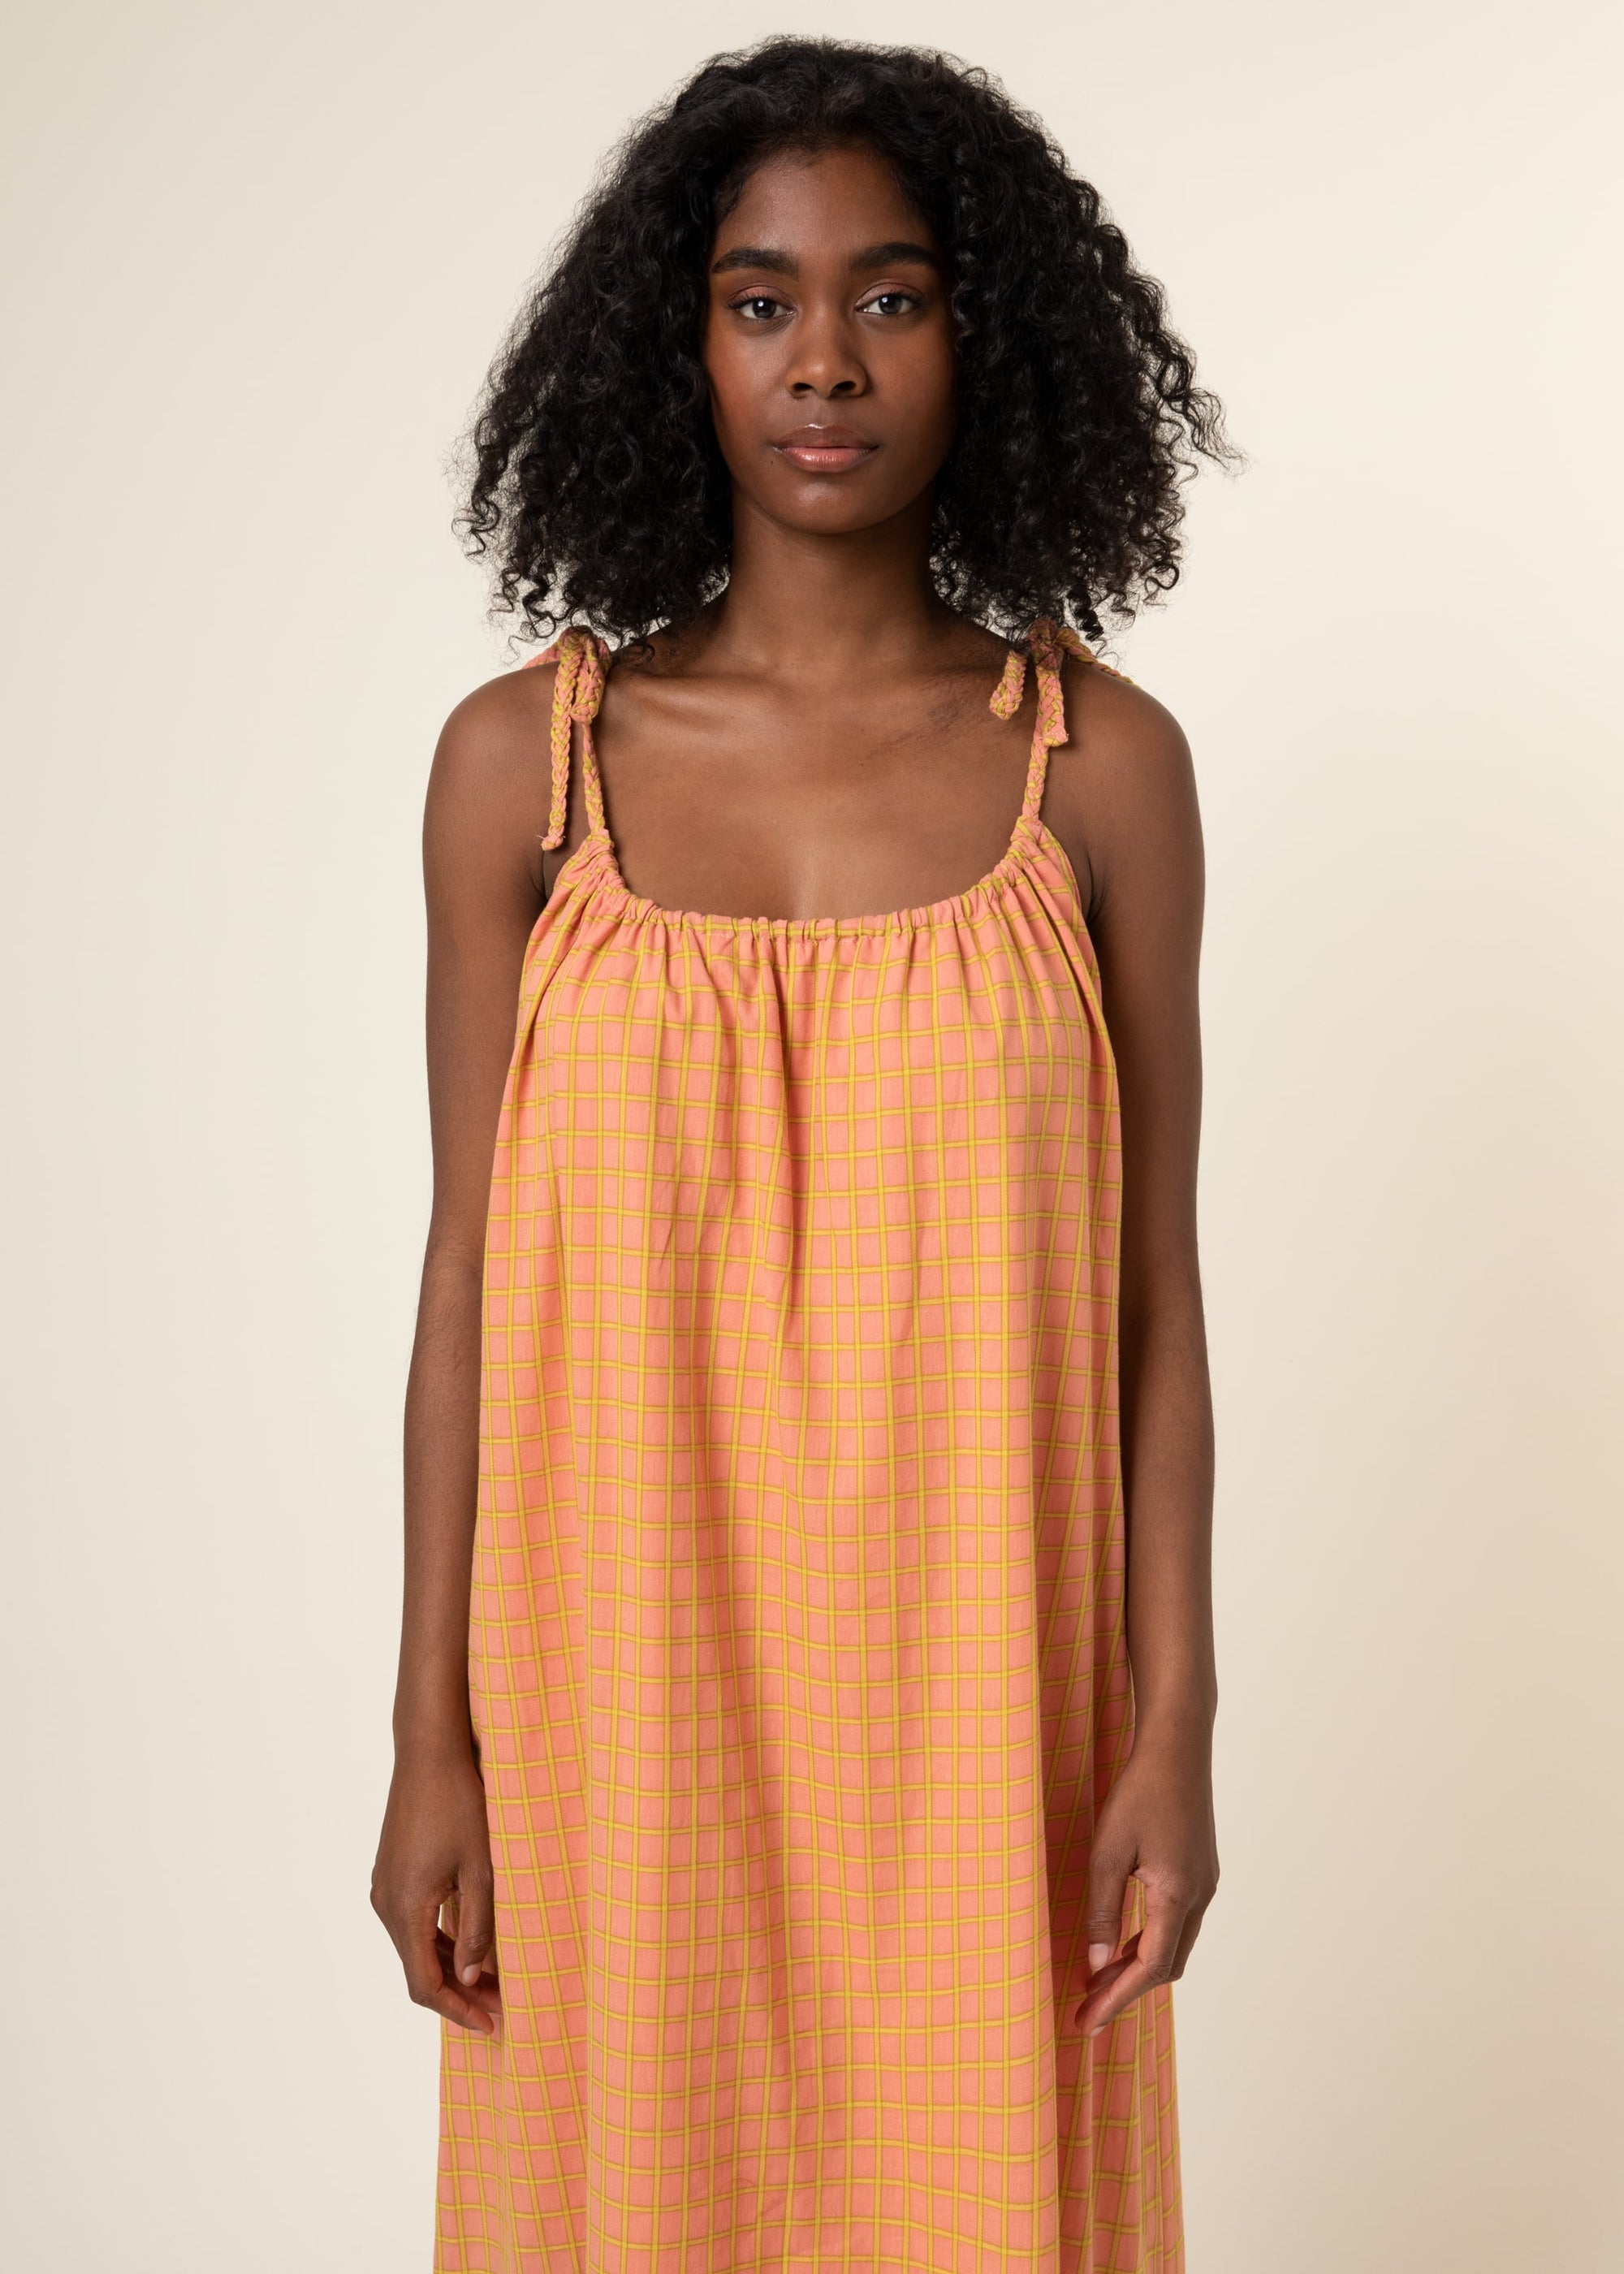 FRNCH Elisee Woven Dress